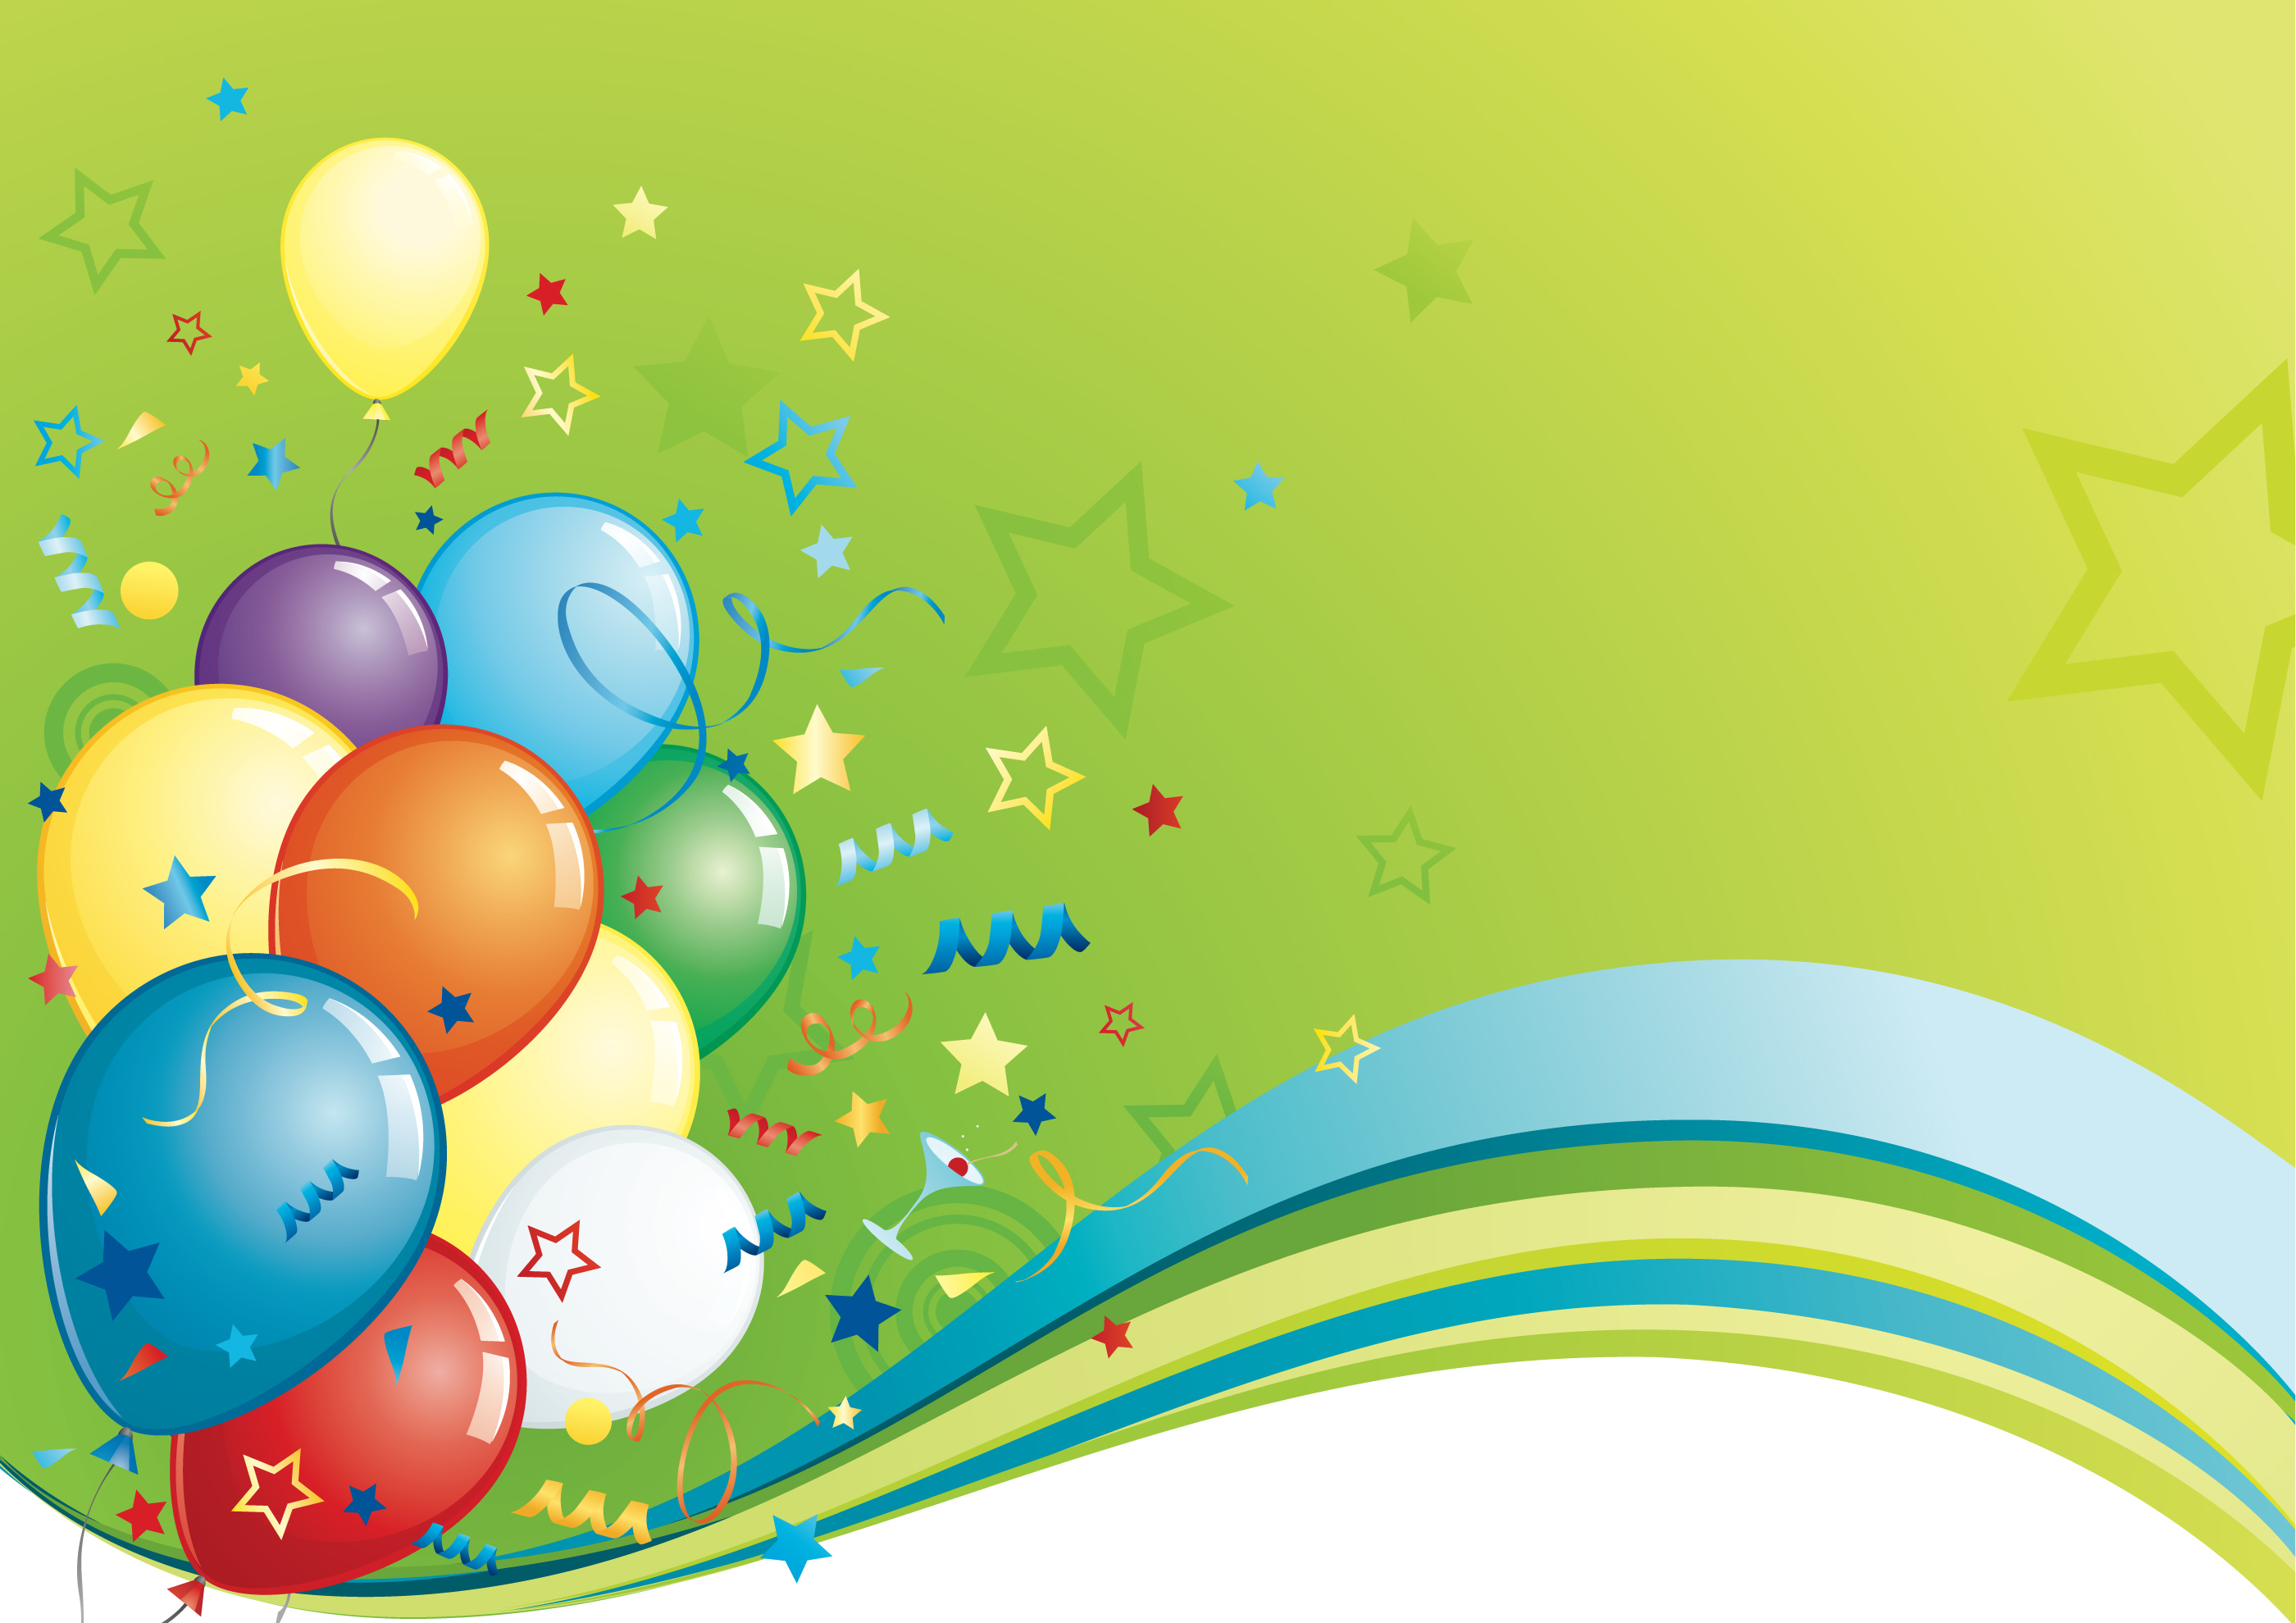 BirtHDay Party Balloons On Green Background De Wallpaper